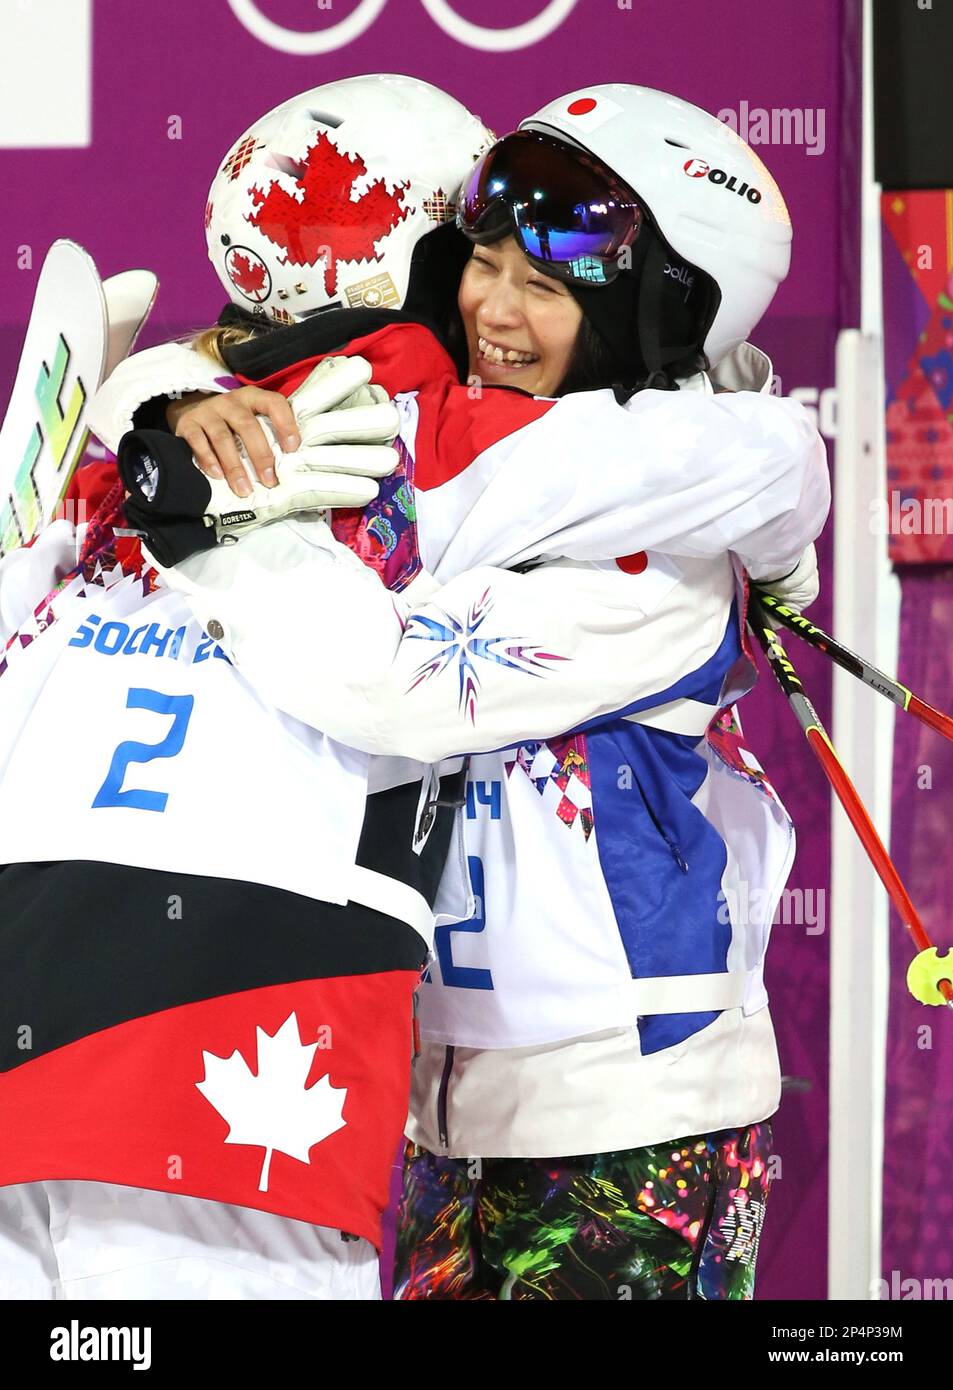 Aiko Uemura of Japan (R) celebrates after finishing fourth in the women's mogul final at Rosa Khutor in the Sochi Olympics on Feb. 8, 2014. 34-year-old Uemura, failed to earn the Olympic medal in her fifth Olympic. ( The Yomiuri Shimbun via AP Images ) Stock Photo